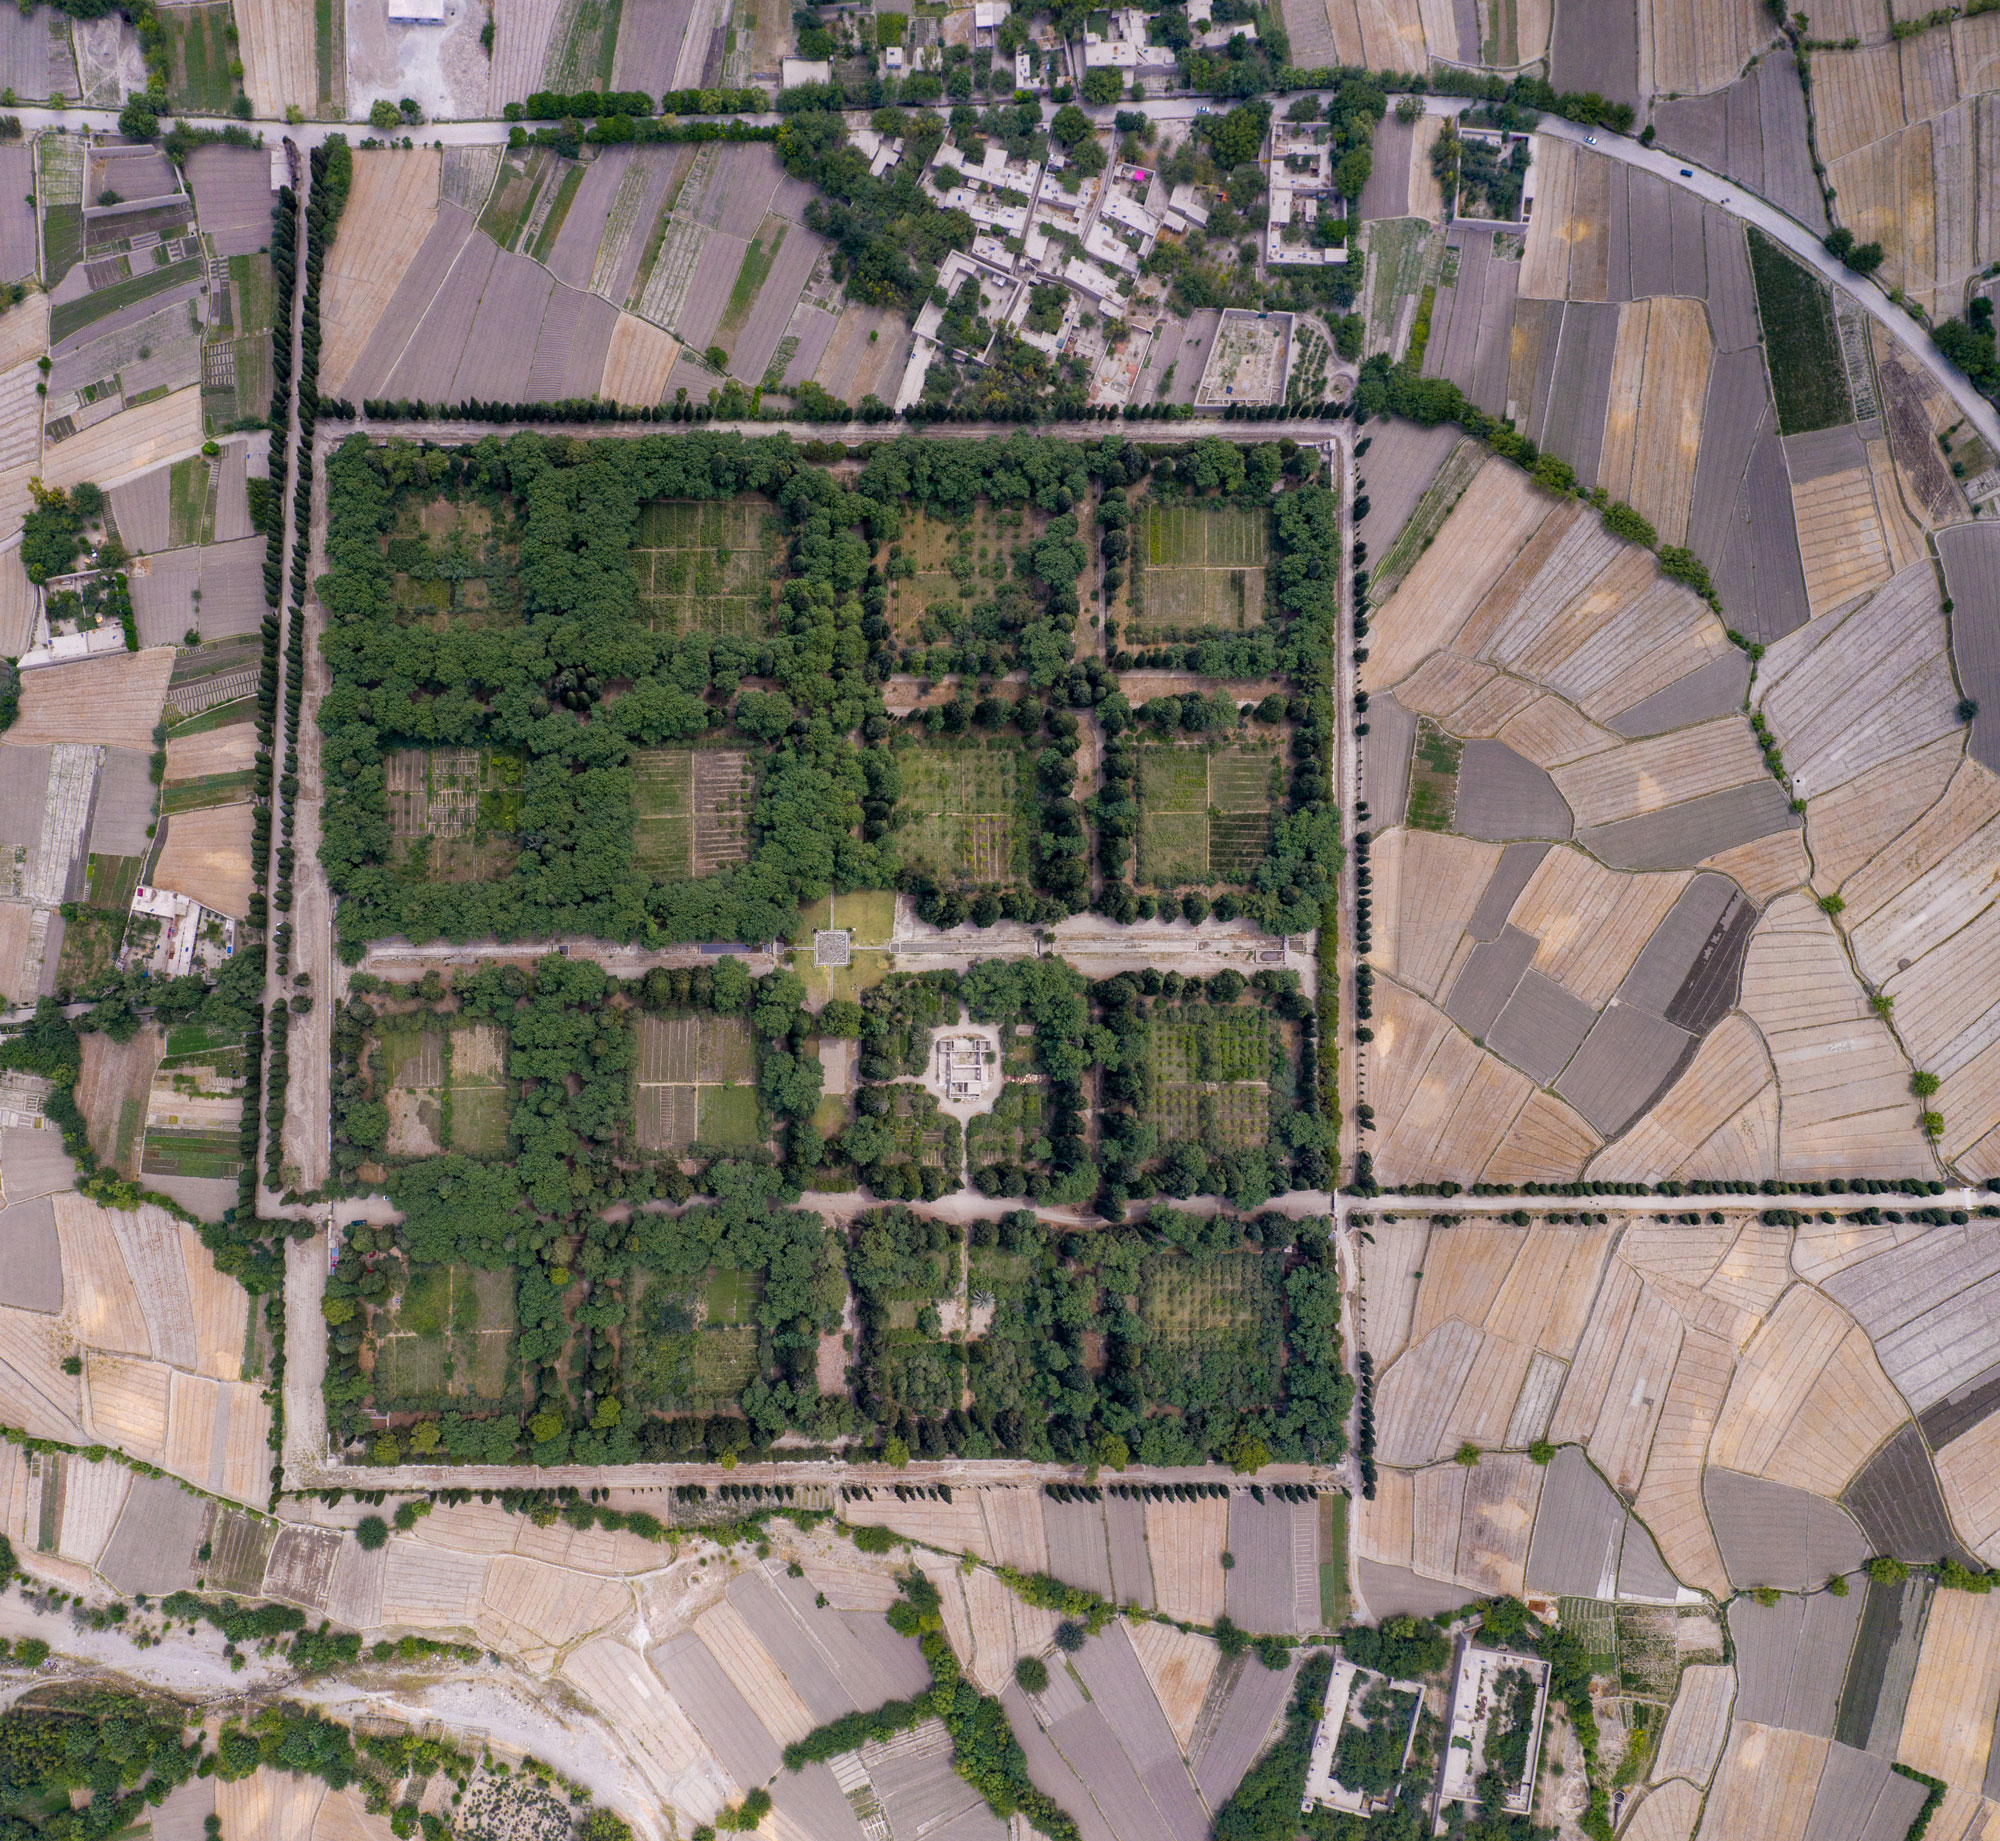 <p>Drone capture over the entire garden seen as an oasis in its rural context</p>